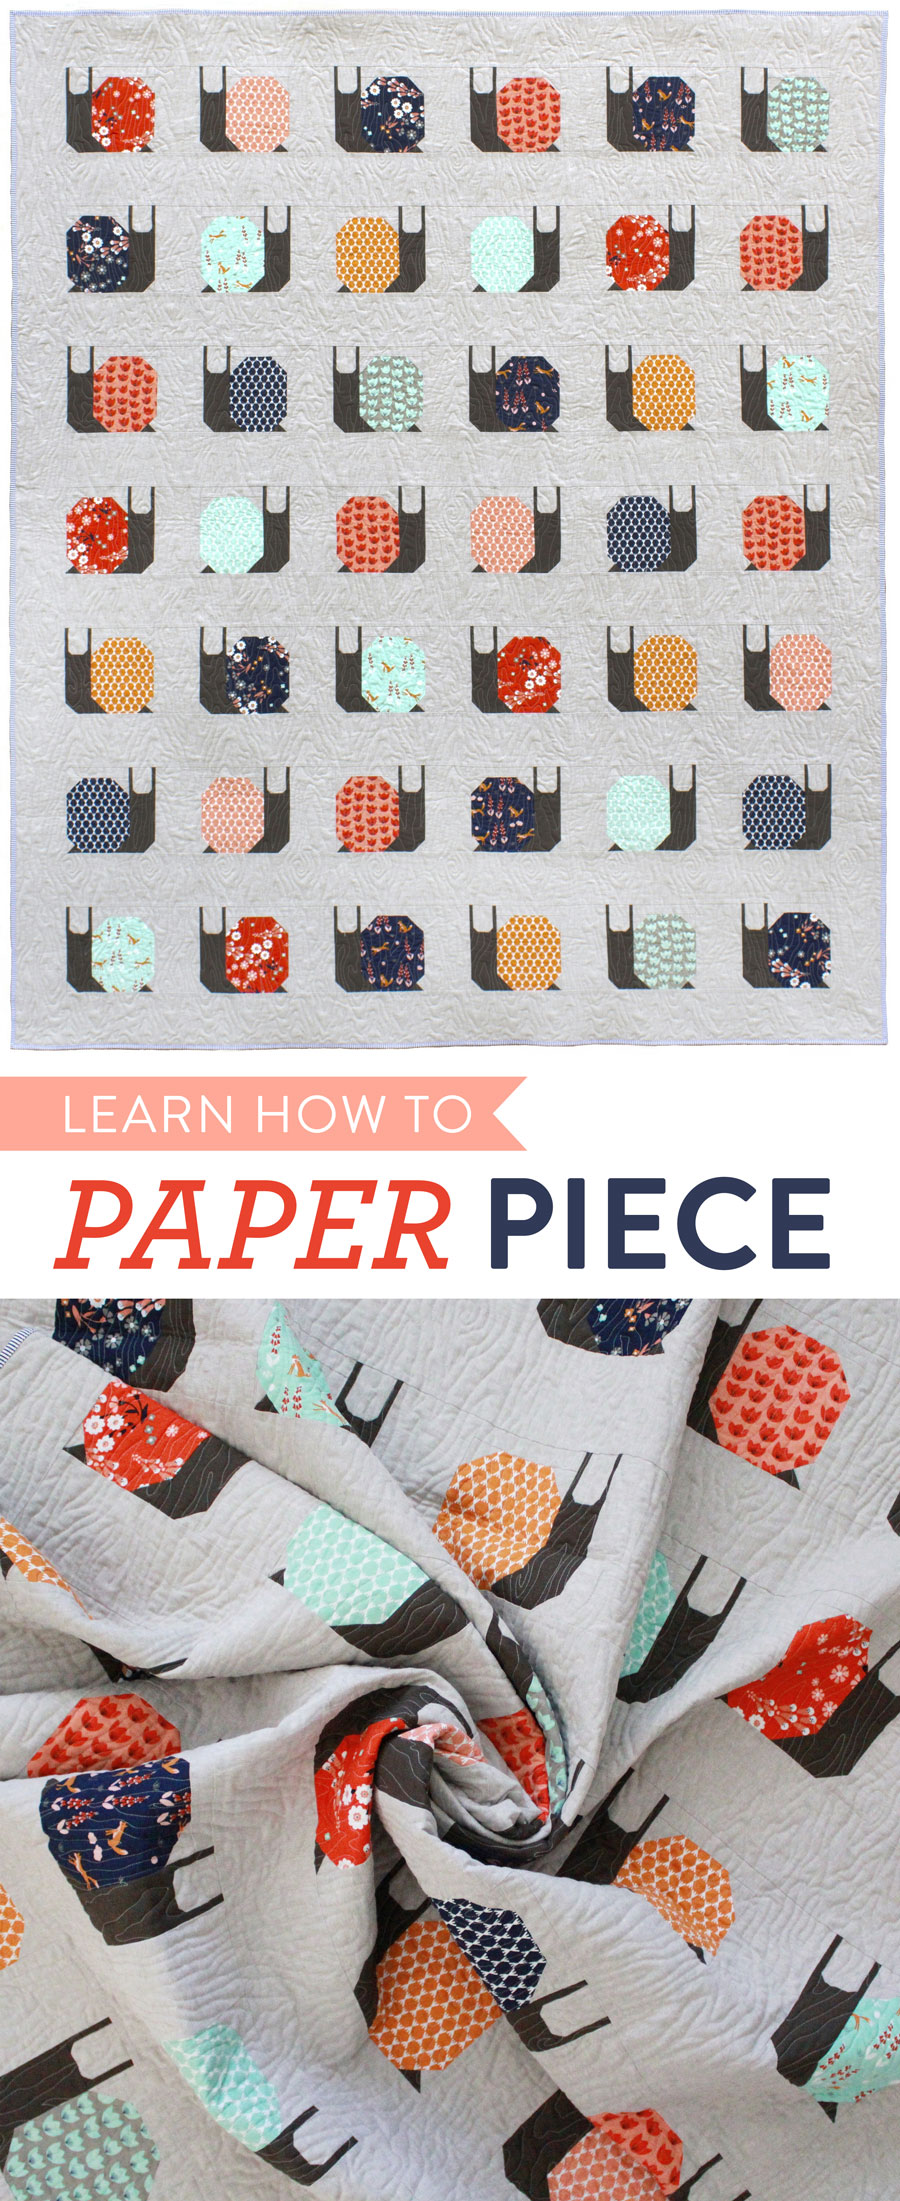 Learn-How-to-Paper-Piece